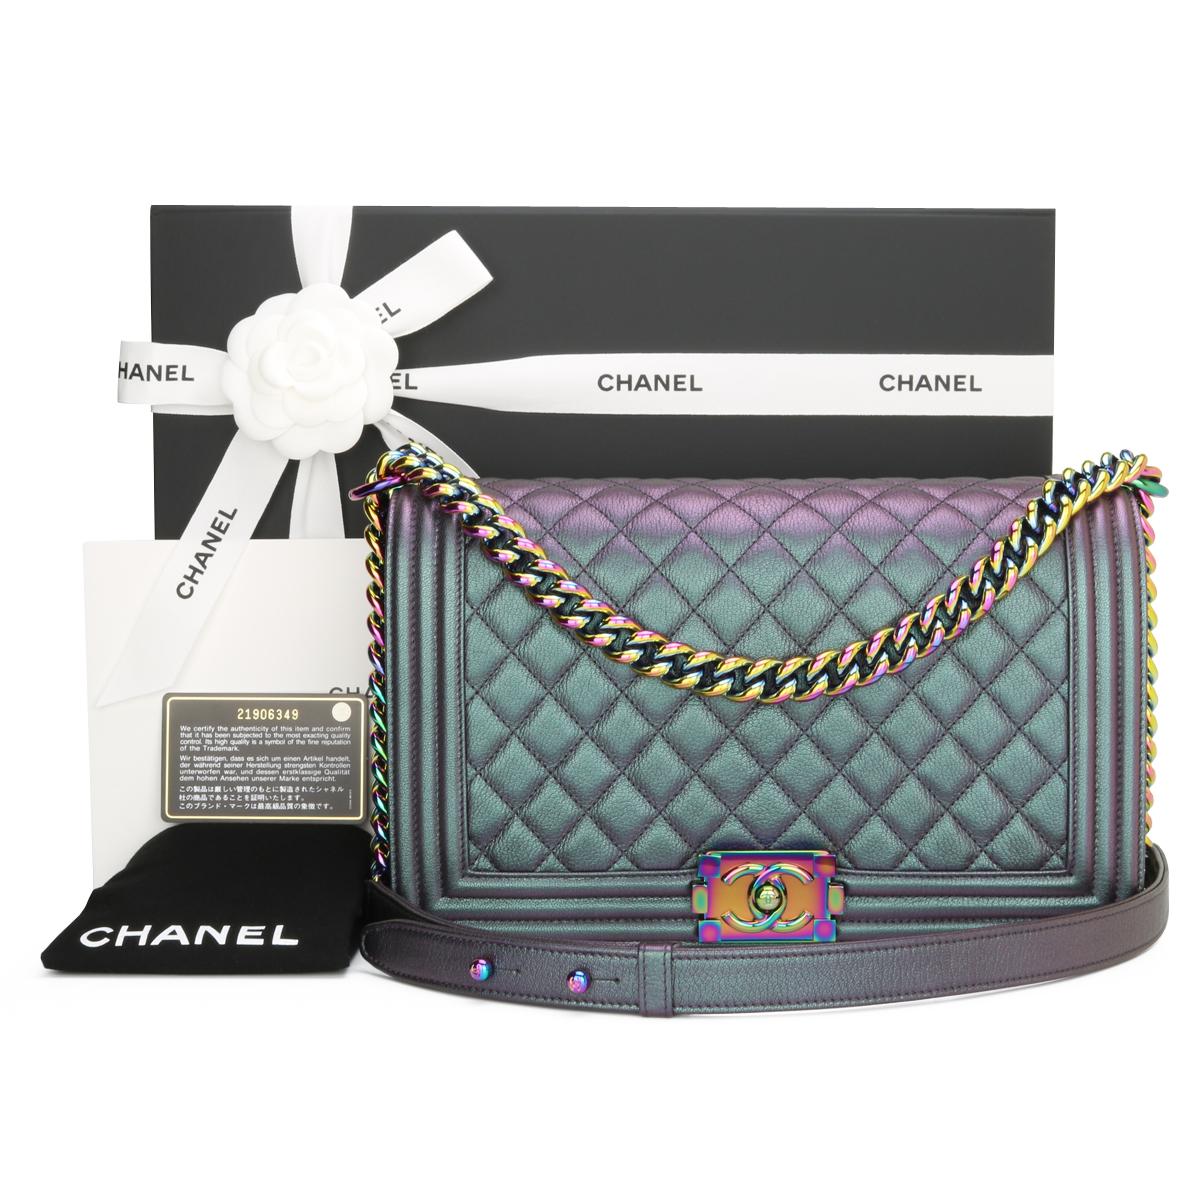 CHANEL New Medium Boy Bag Quilted Iridescent Purple Goatskin with Rainbow Hardware 2016.

This stunning bag is still in pristine condition, the bag still holds its original shape, and the hardware is still very clean and shiny.

It is a truly